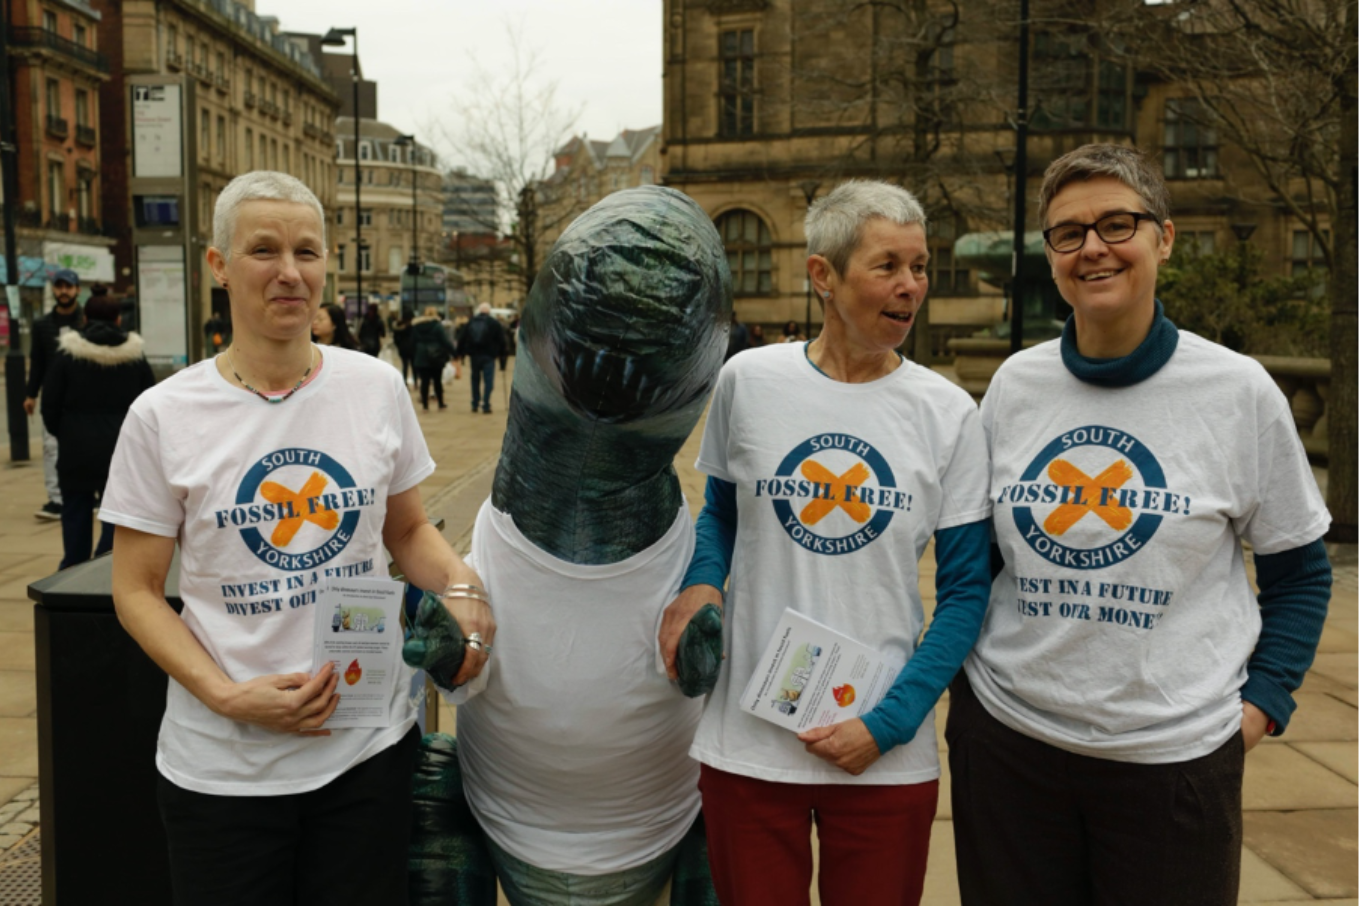 Campaigns for South Yorkshire Fossil Free